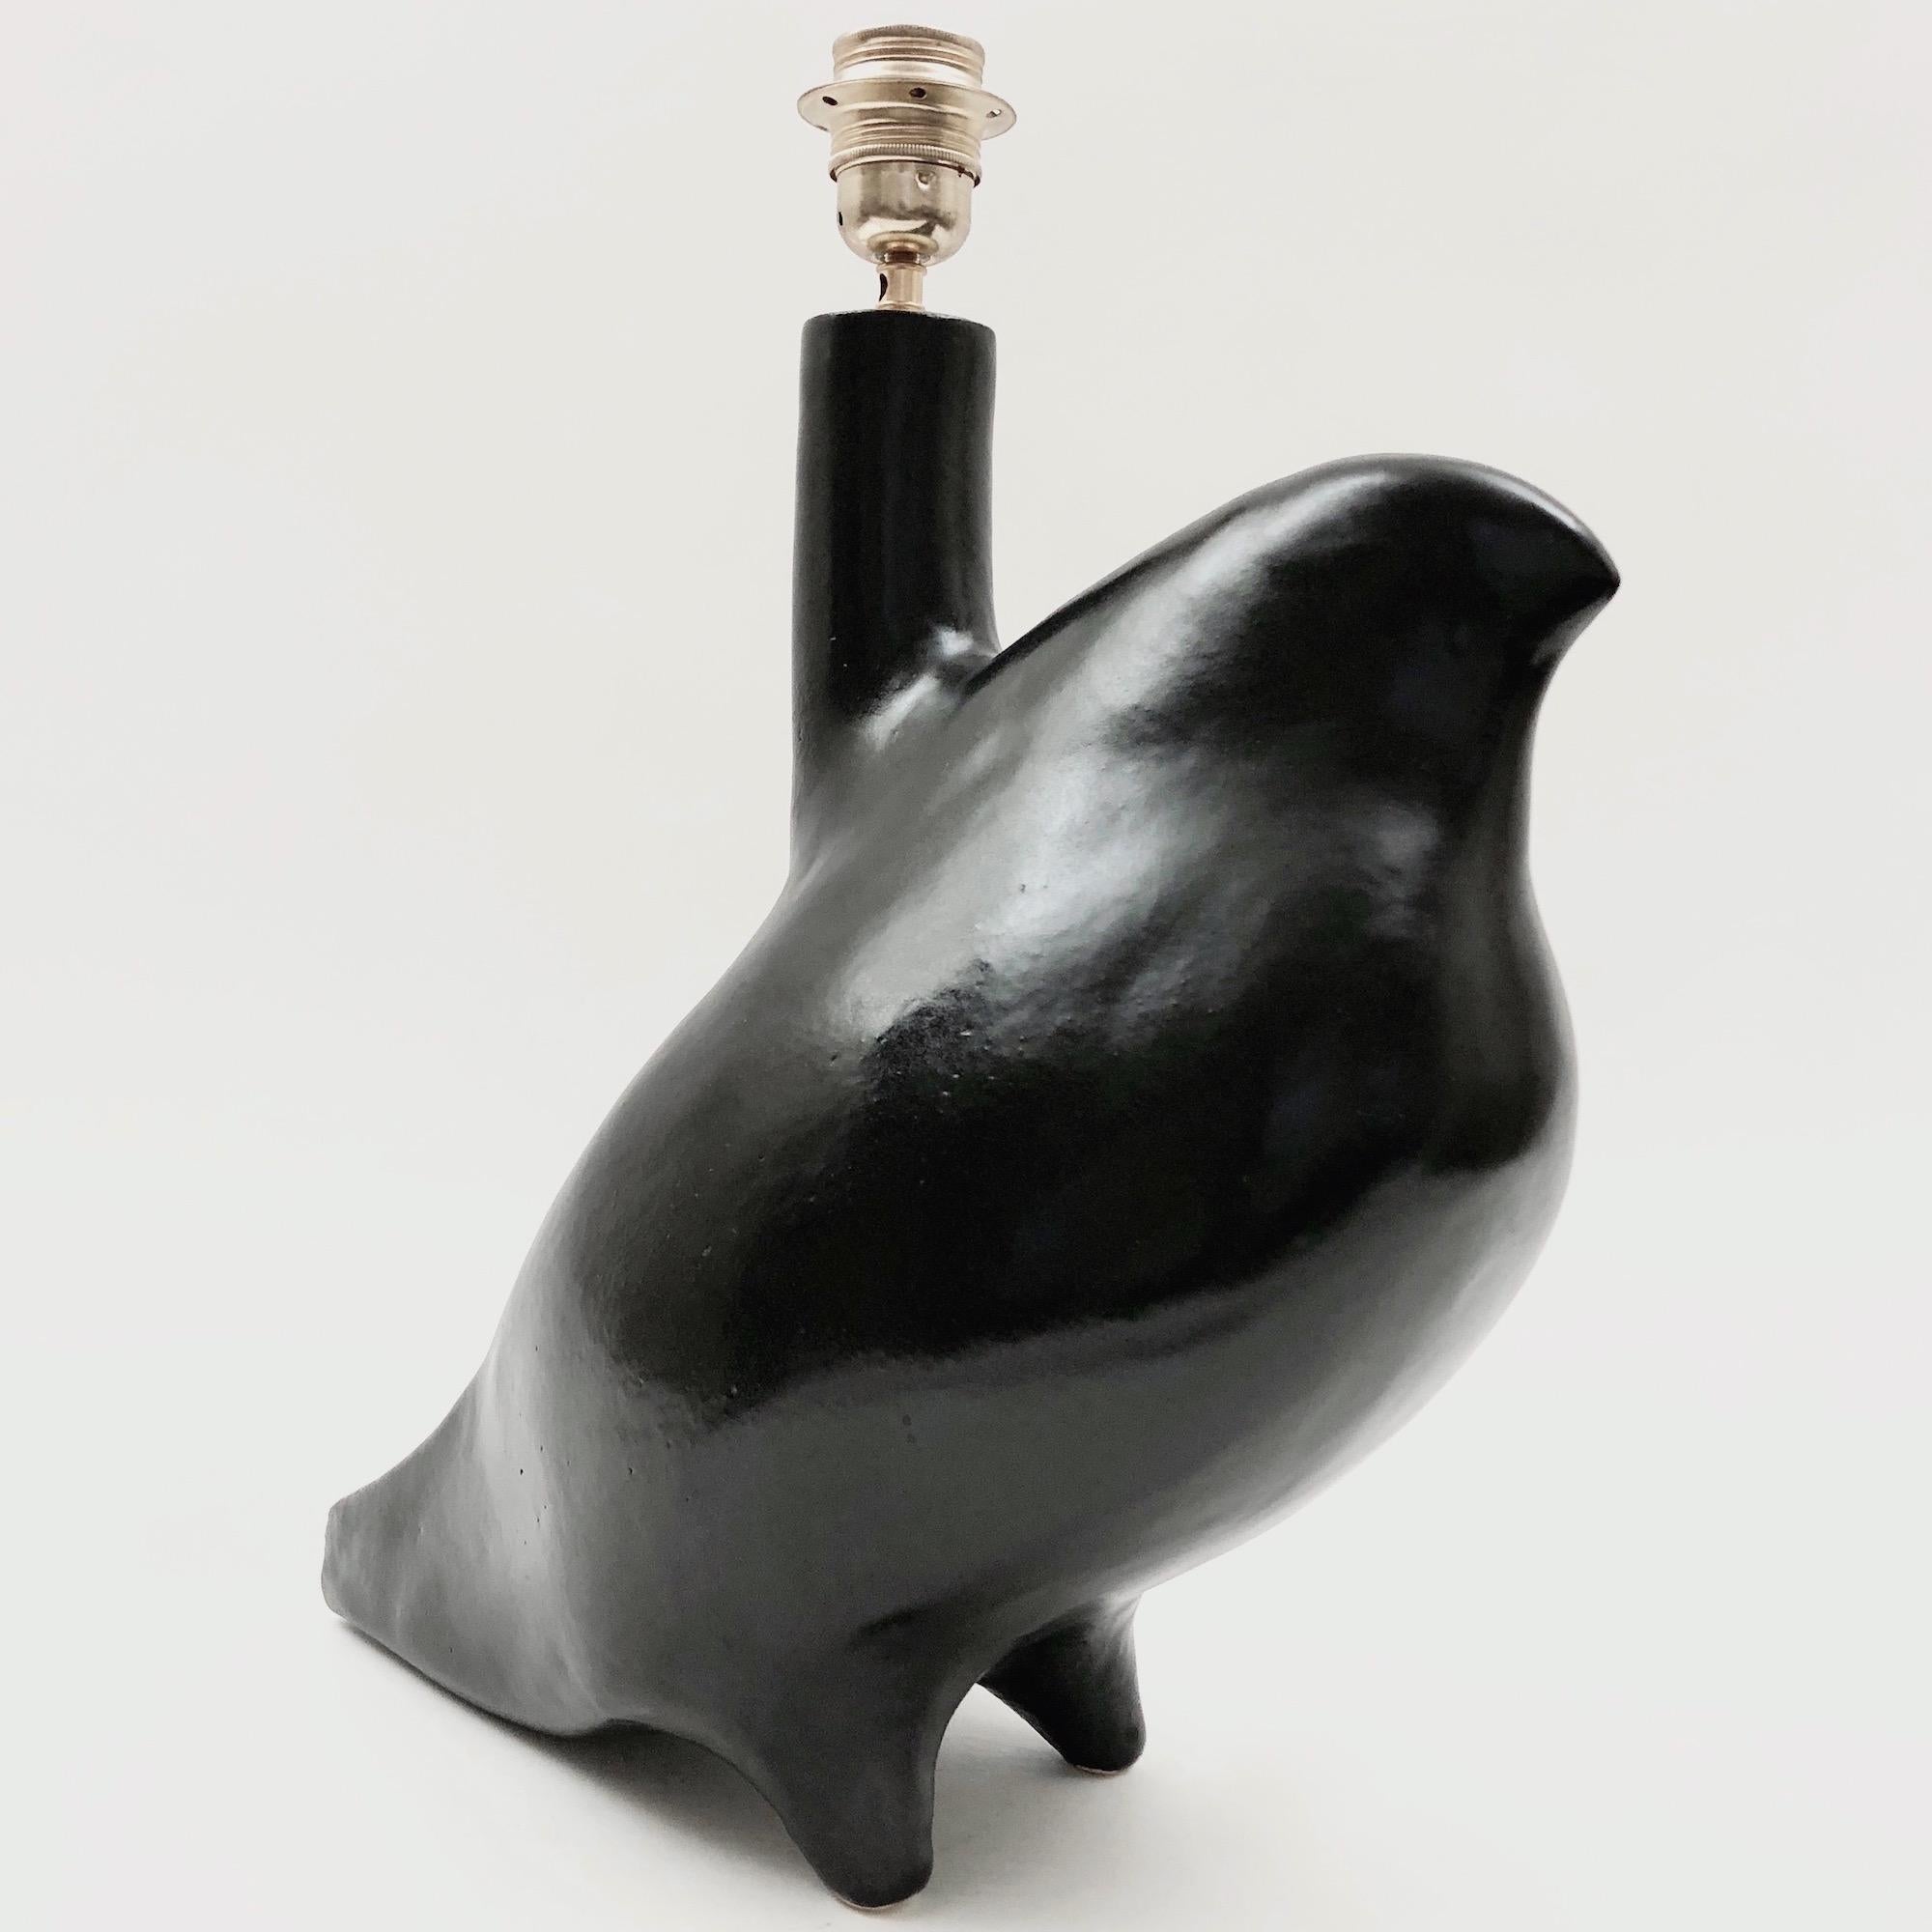 Large sculptural pottery piece, forming table lamp base with a stylized bird shape.
Ceramic enameled in deep black.
One of a kind and exclusive handmade piece, designed and signed by the French artists ceramicists: Dalo. 

Dimensions:
The